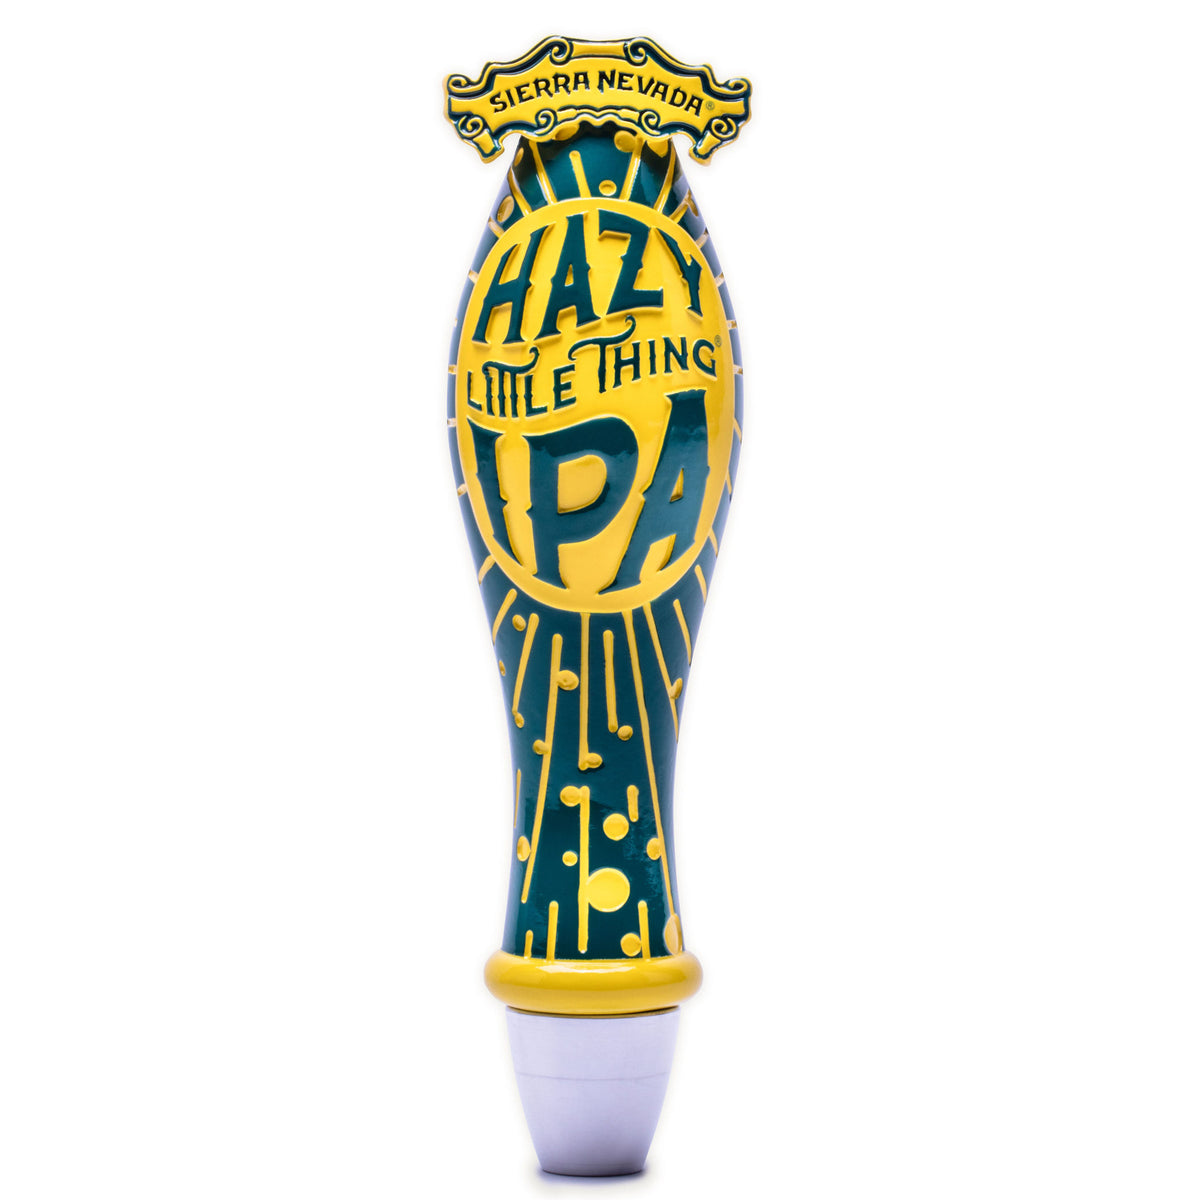 Sierra Nevada Brewing Co. Hazy Little Thing IPA Tap Handle